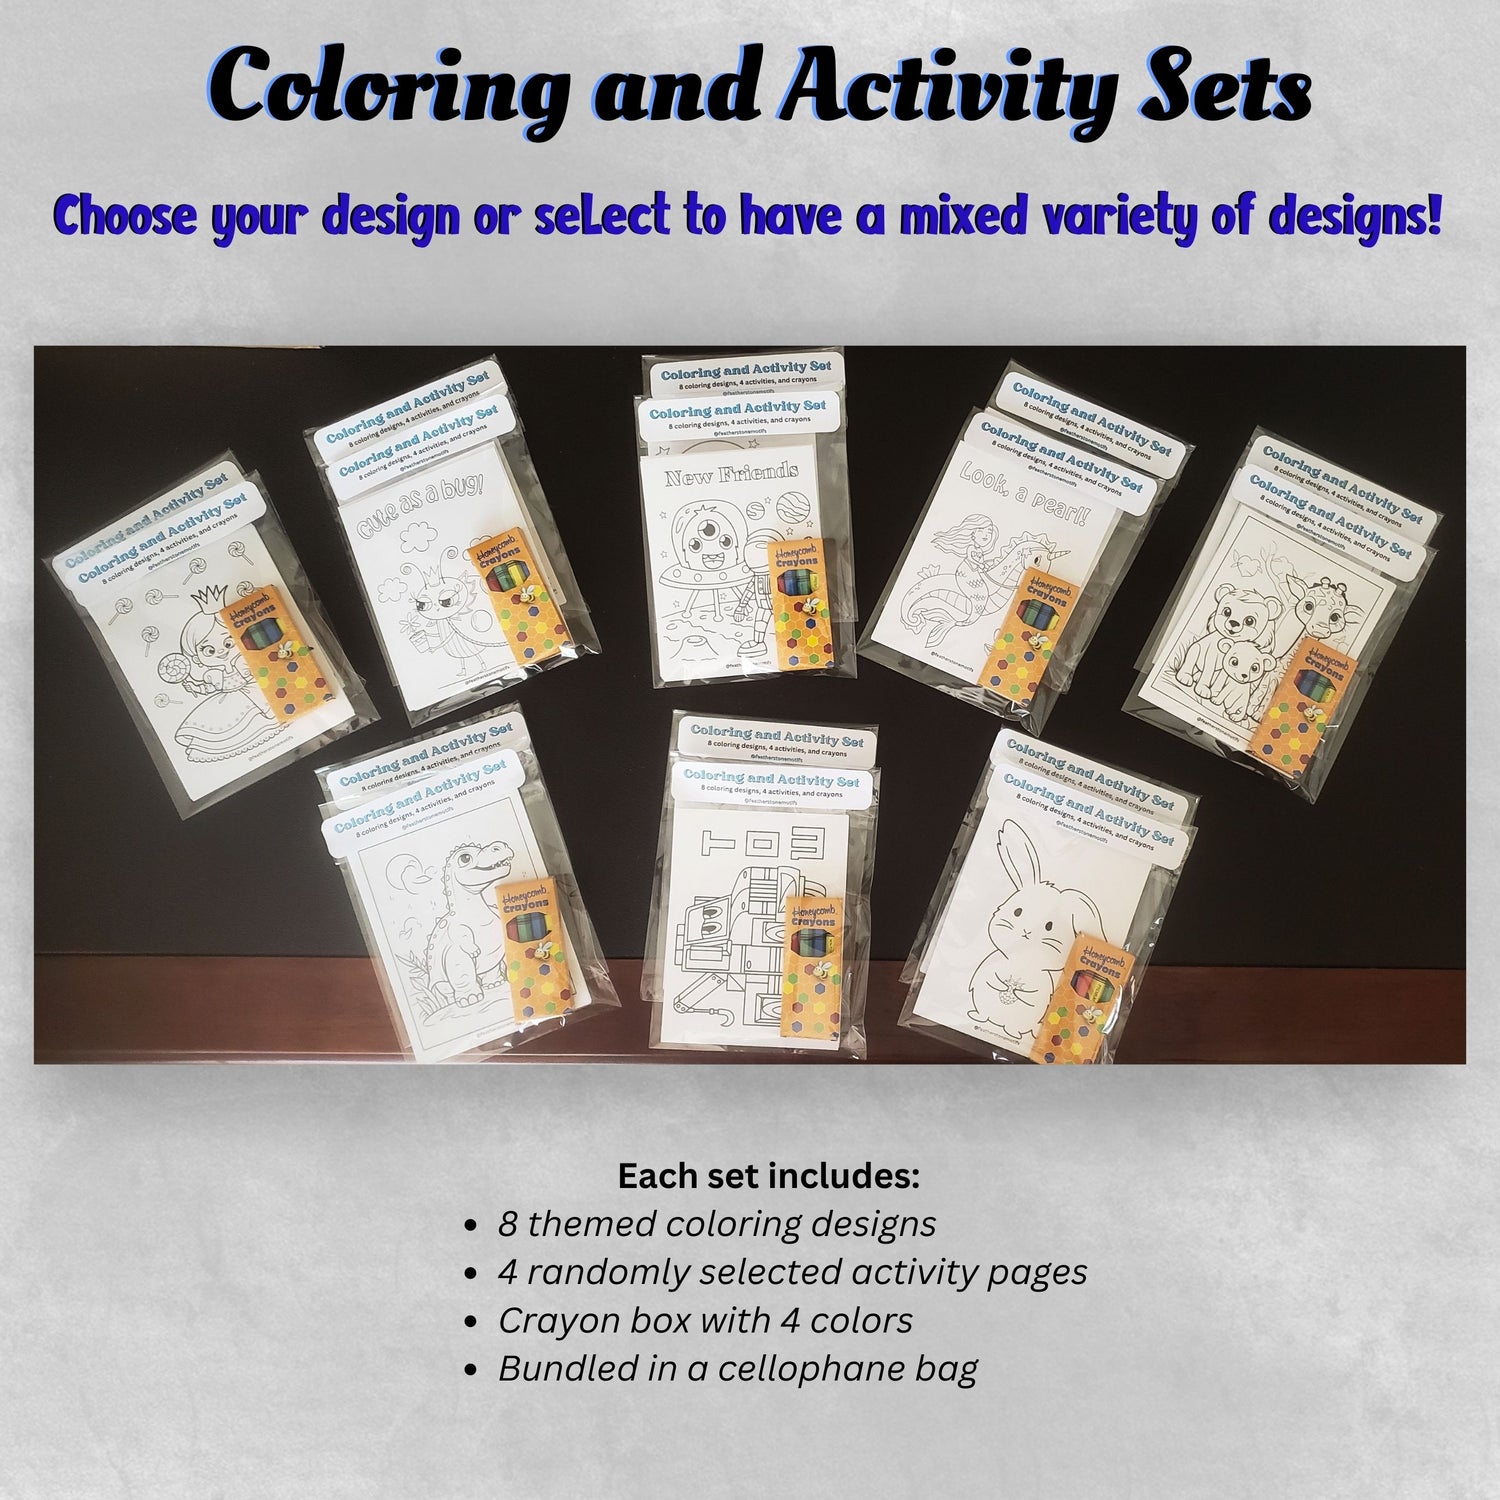 Coloring and Activity Sets